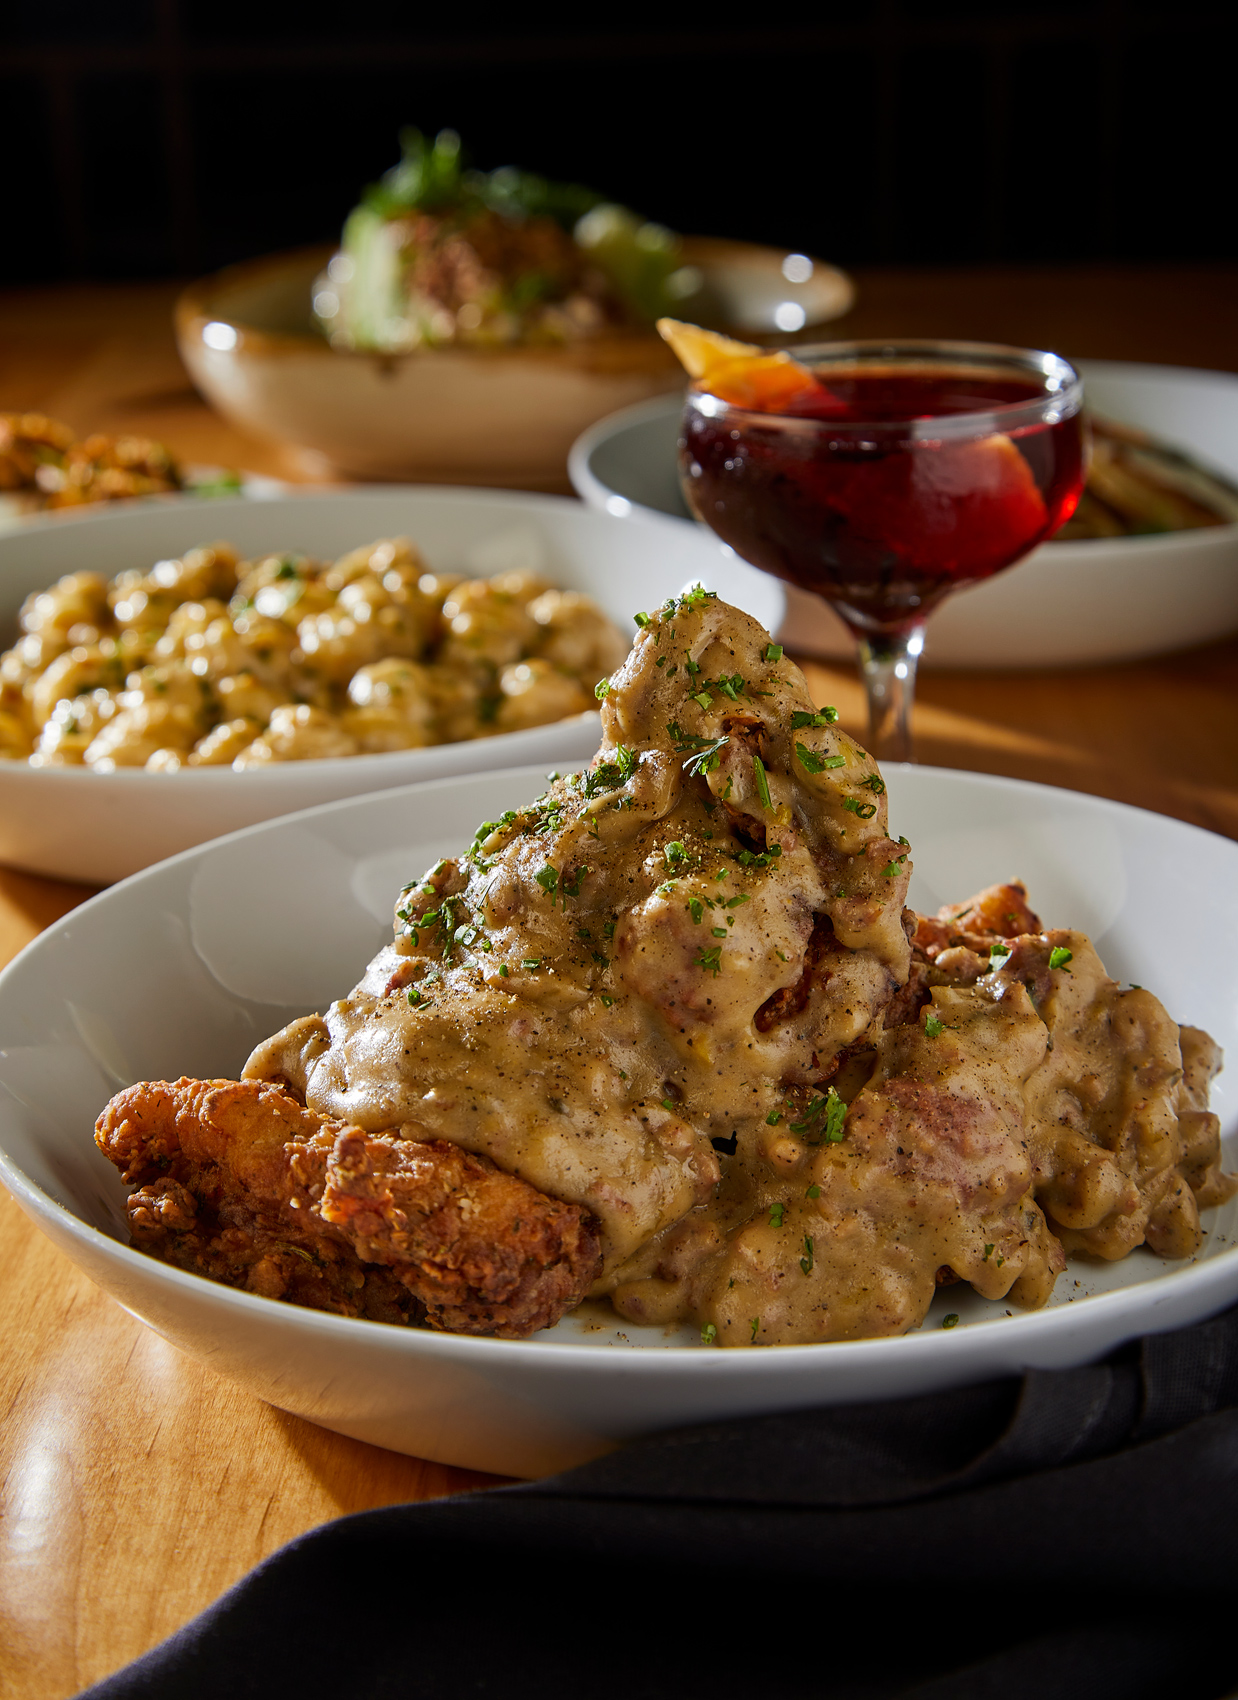 Chicken Fried Chicken photo by Chris Kessler Photography.  Chris Kessler is a freelance Photographer based in Milwaukee Wisconsin. Specializing in Food photography and portraiture. 